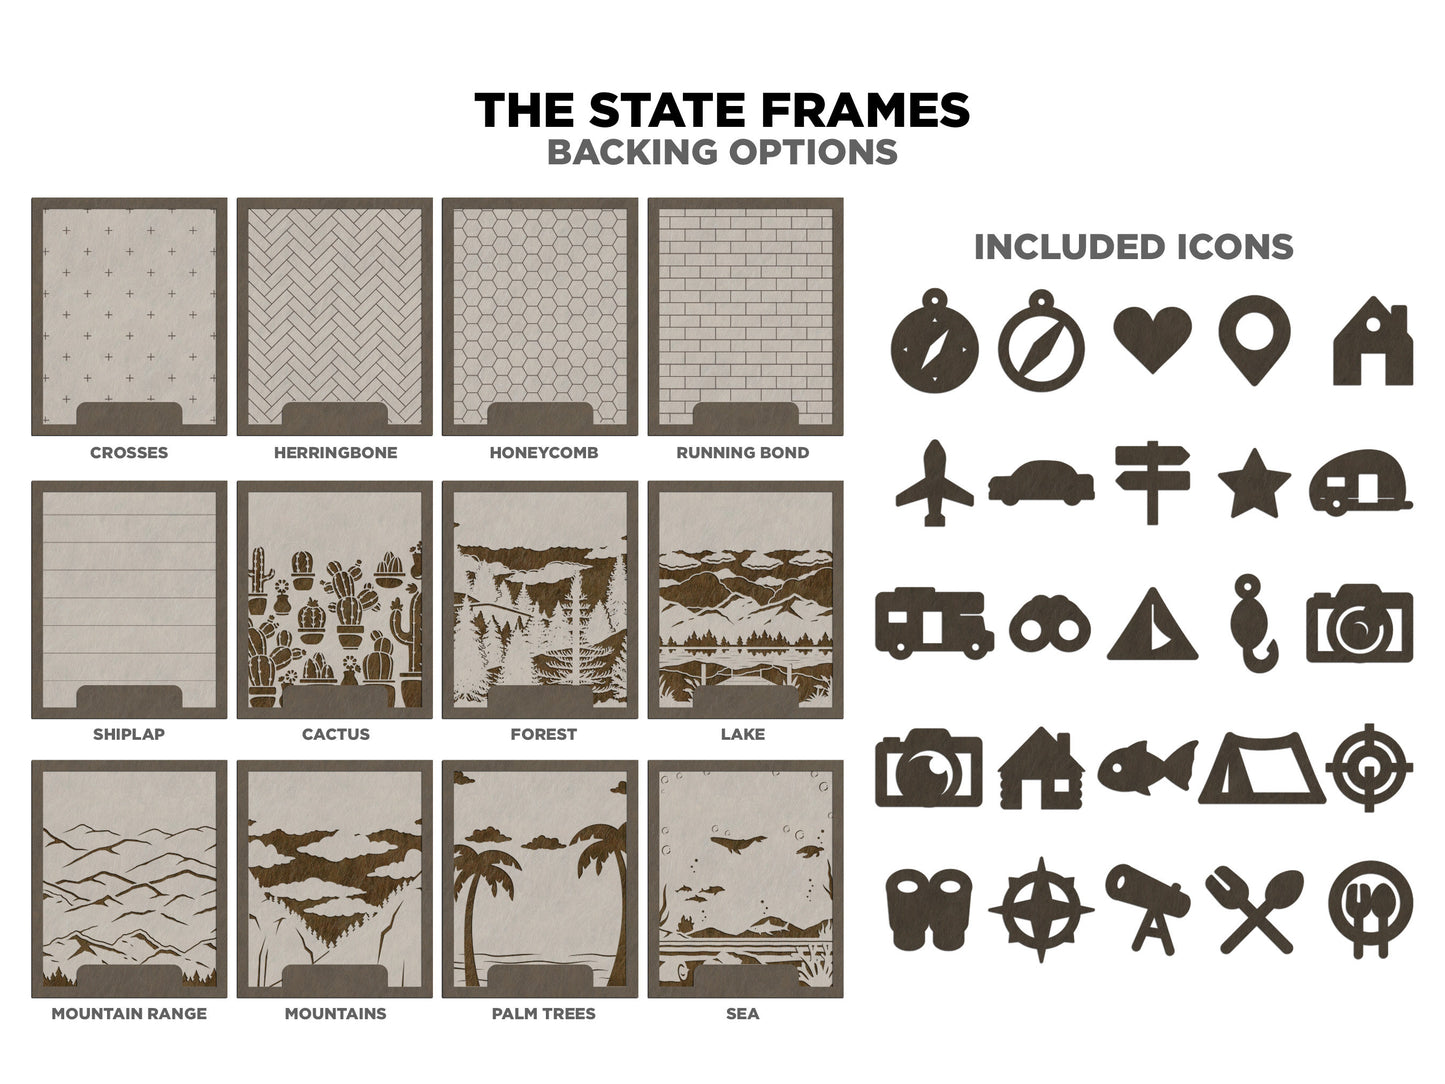 The Mississippi State Frame - 13 text options, 12 backgrounds, 25 icons Included - Make over 7,500 designs - Glowforge & Lightburn Tested